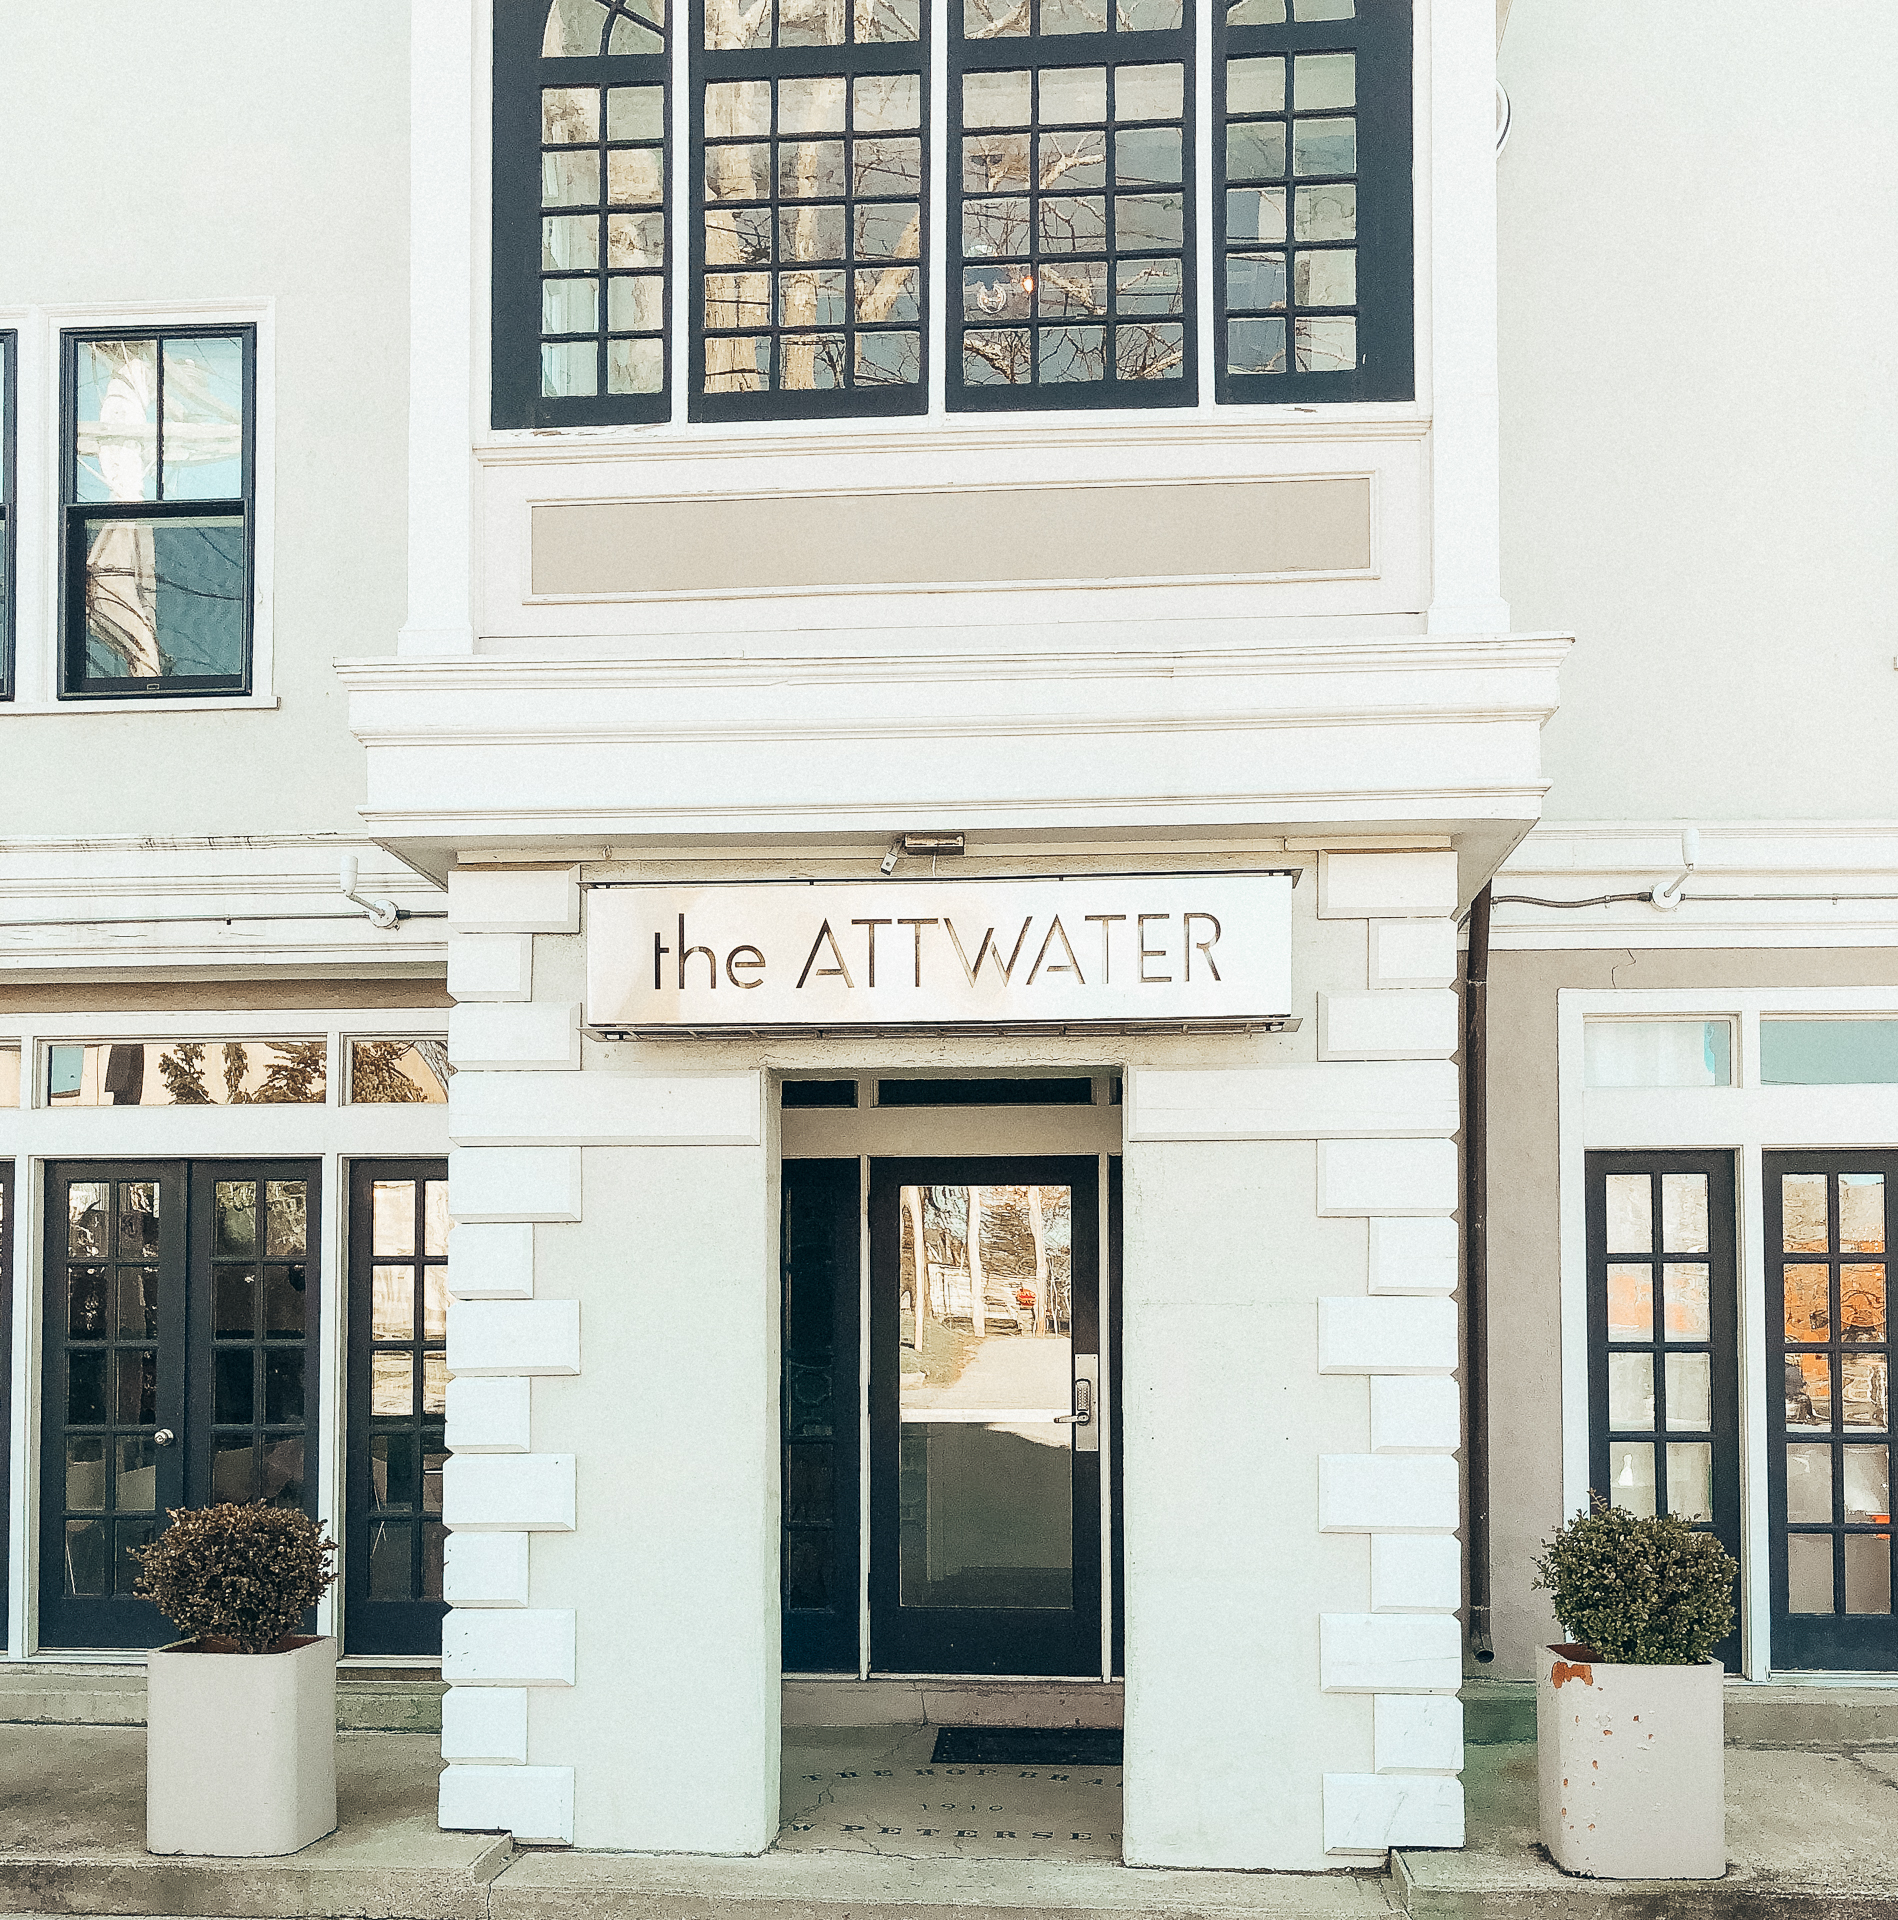 The Attwater